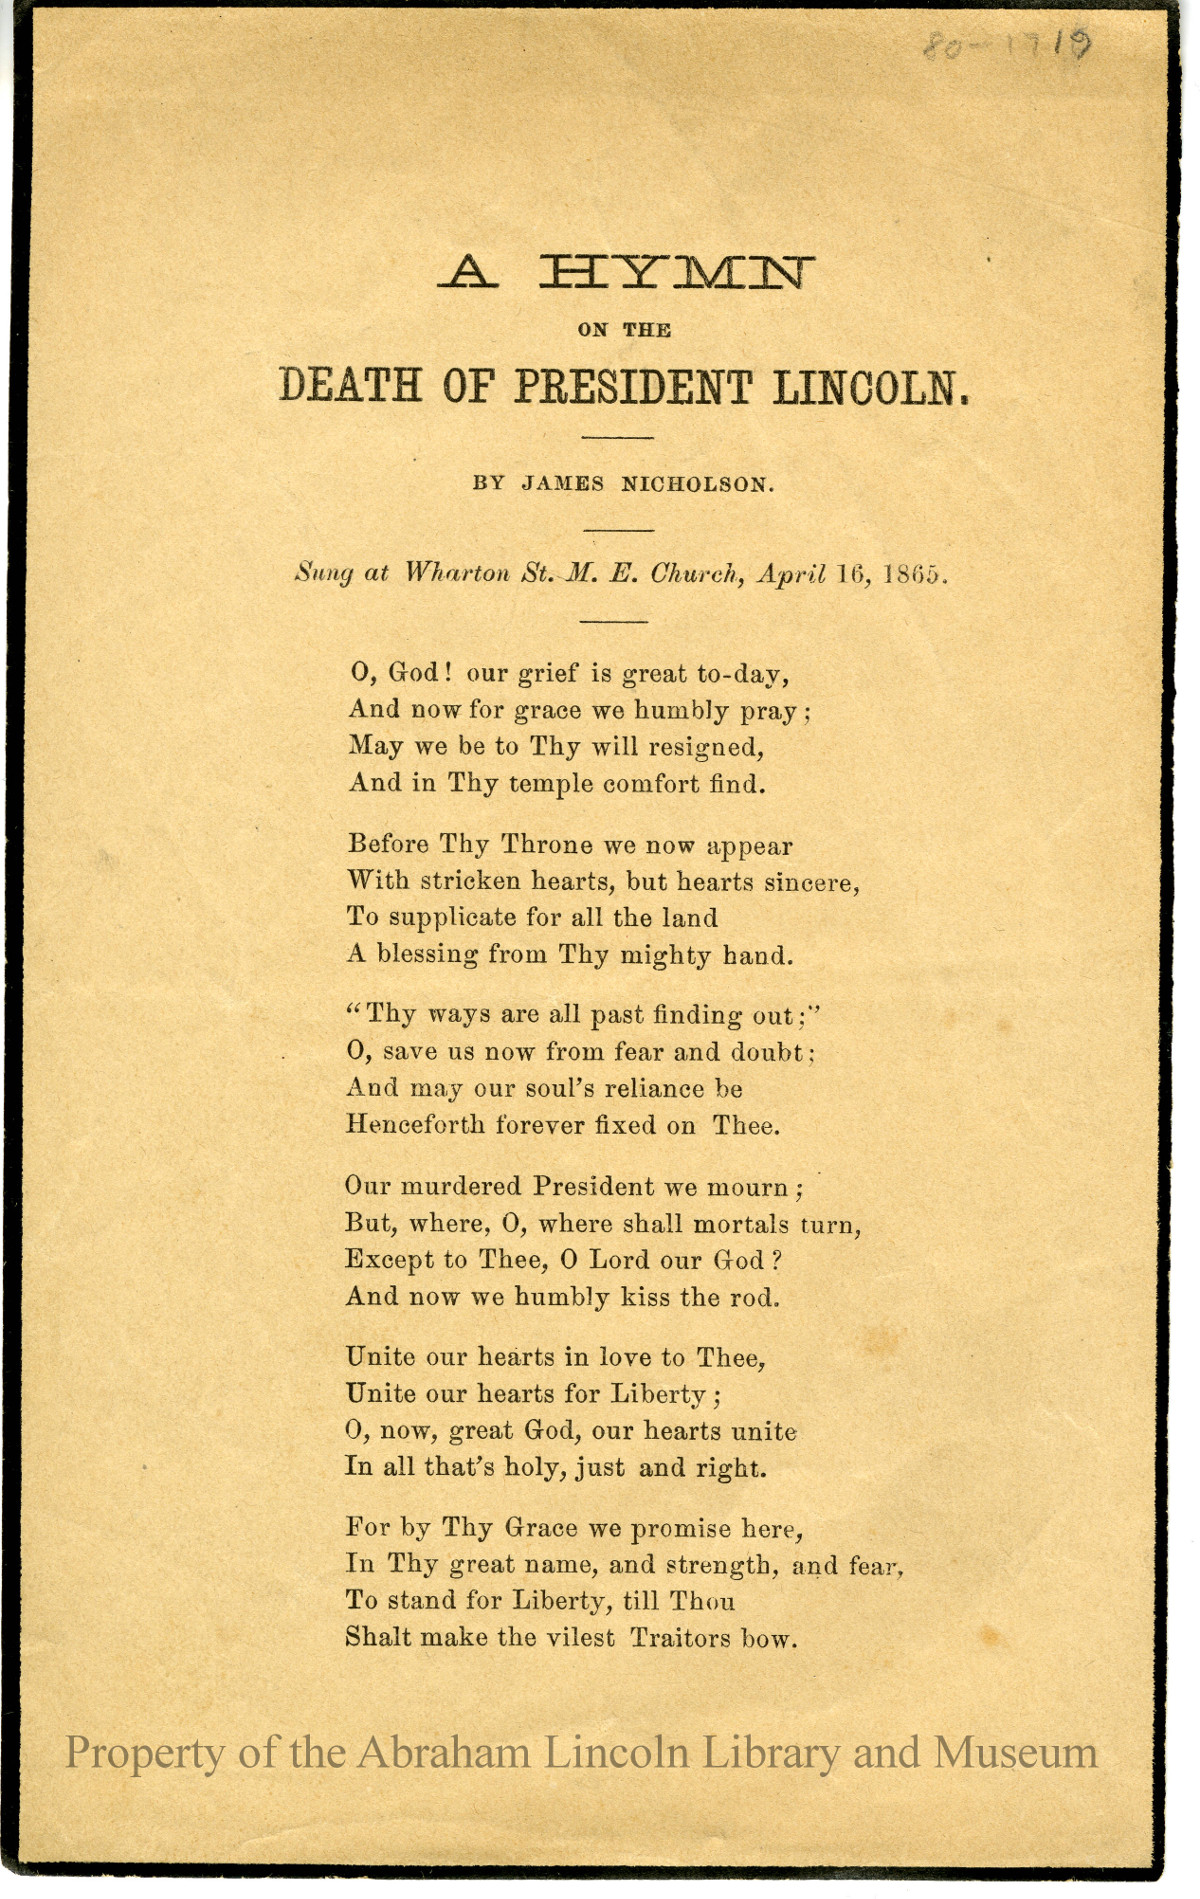 A Hymn on the Death of President Lincoln